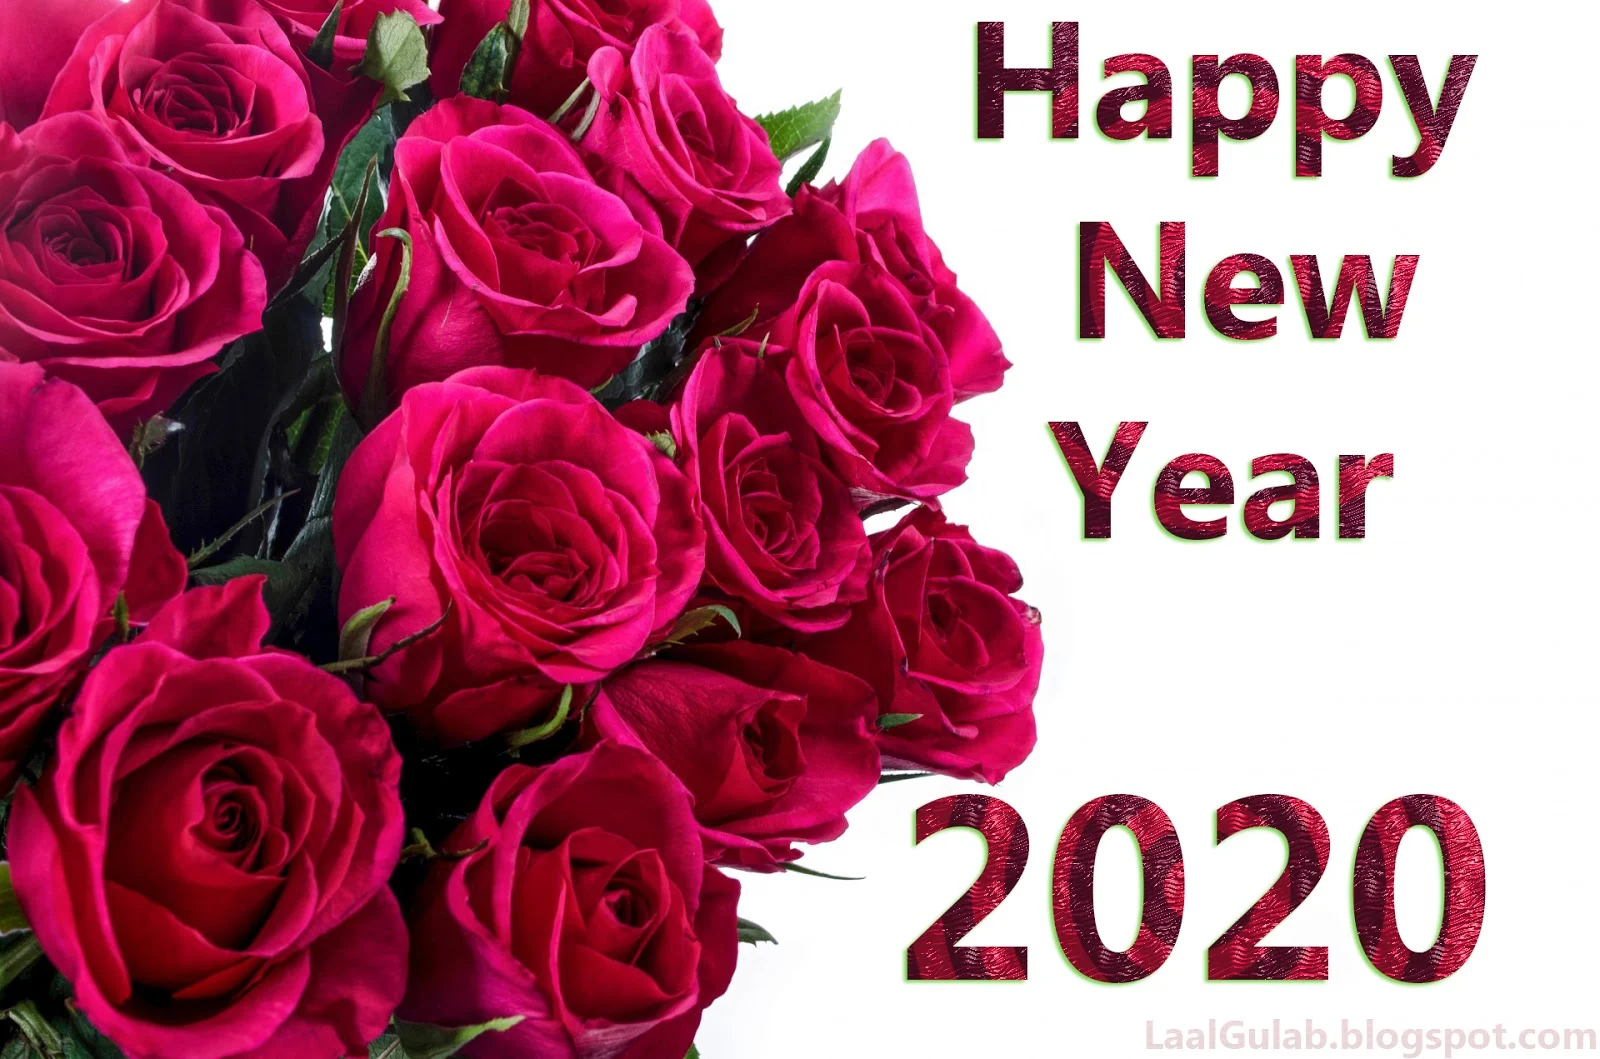 Happy New Year 2020 Wallpapers HD Images Happy New Year 2020 Wallpaper